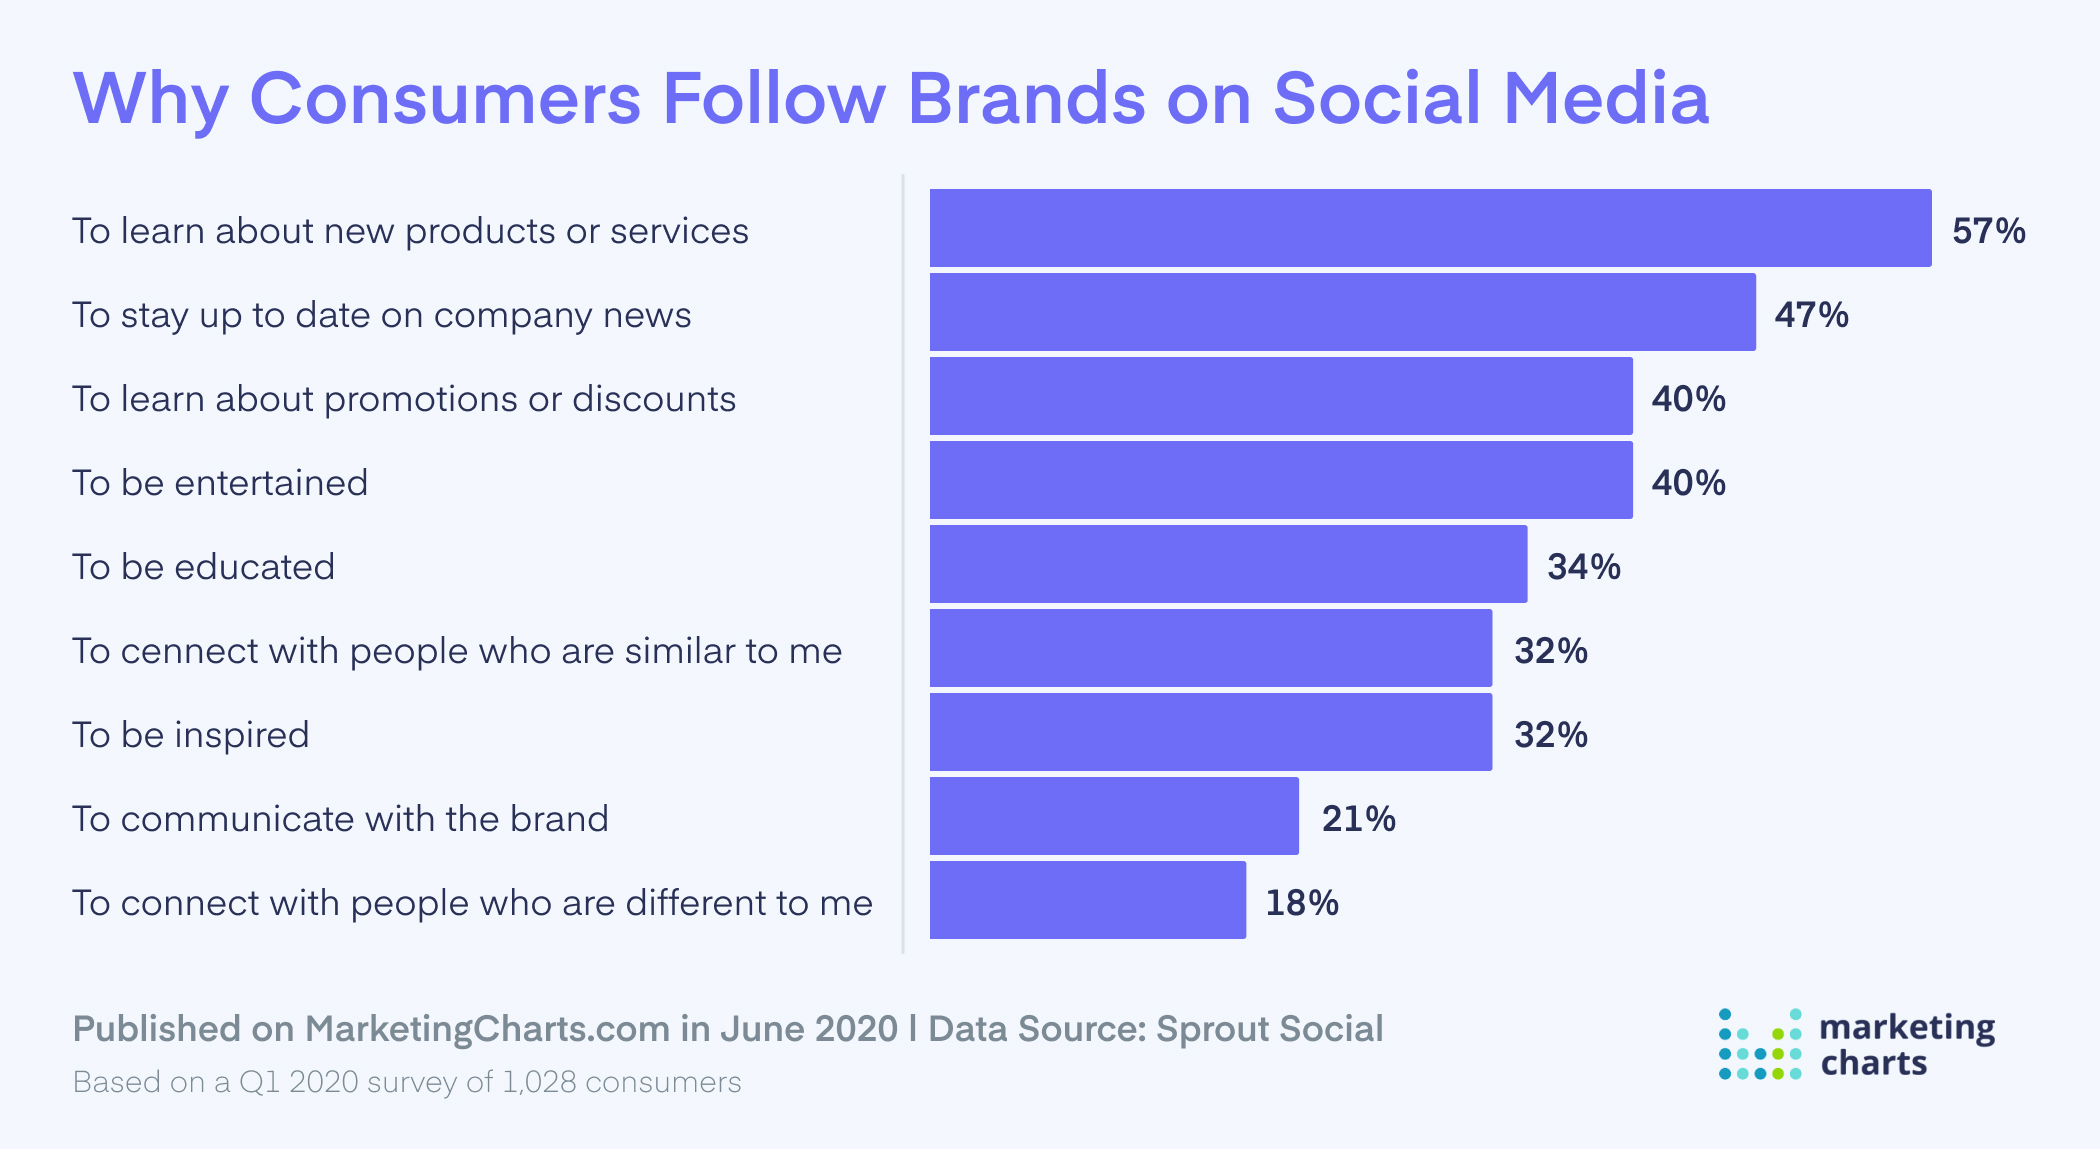 Why Consumers Follow Brands on Social Media